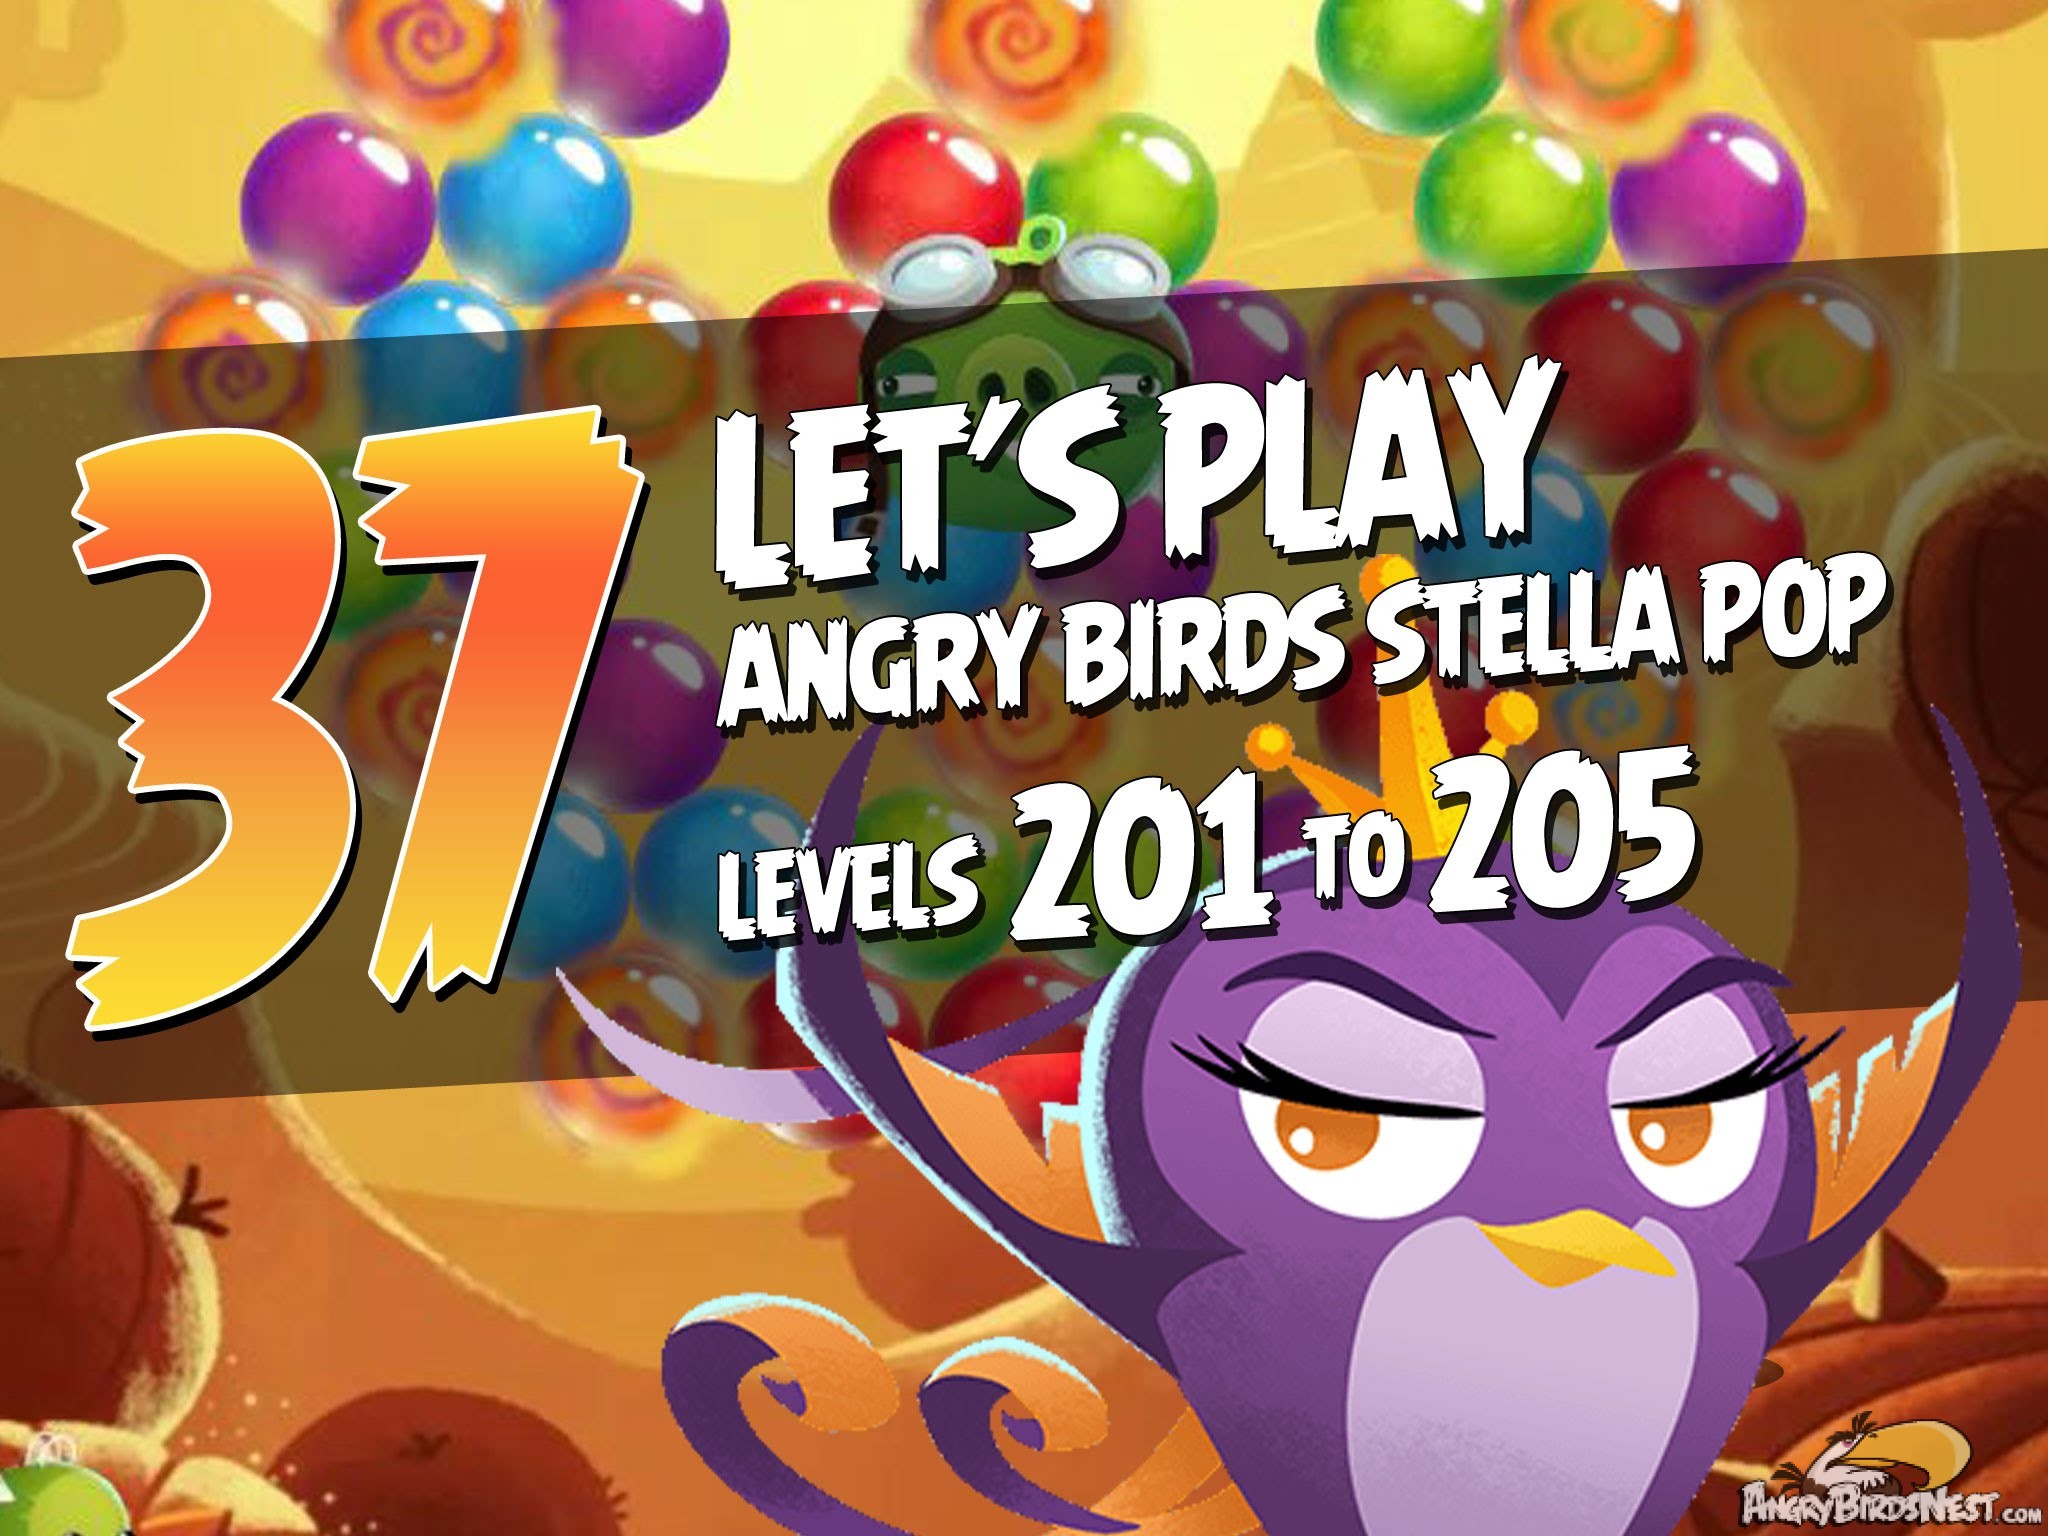 Angry Birds Stella Pop Let's Play Levels 201 to 205